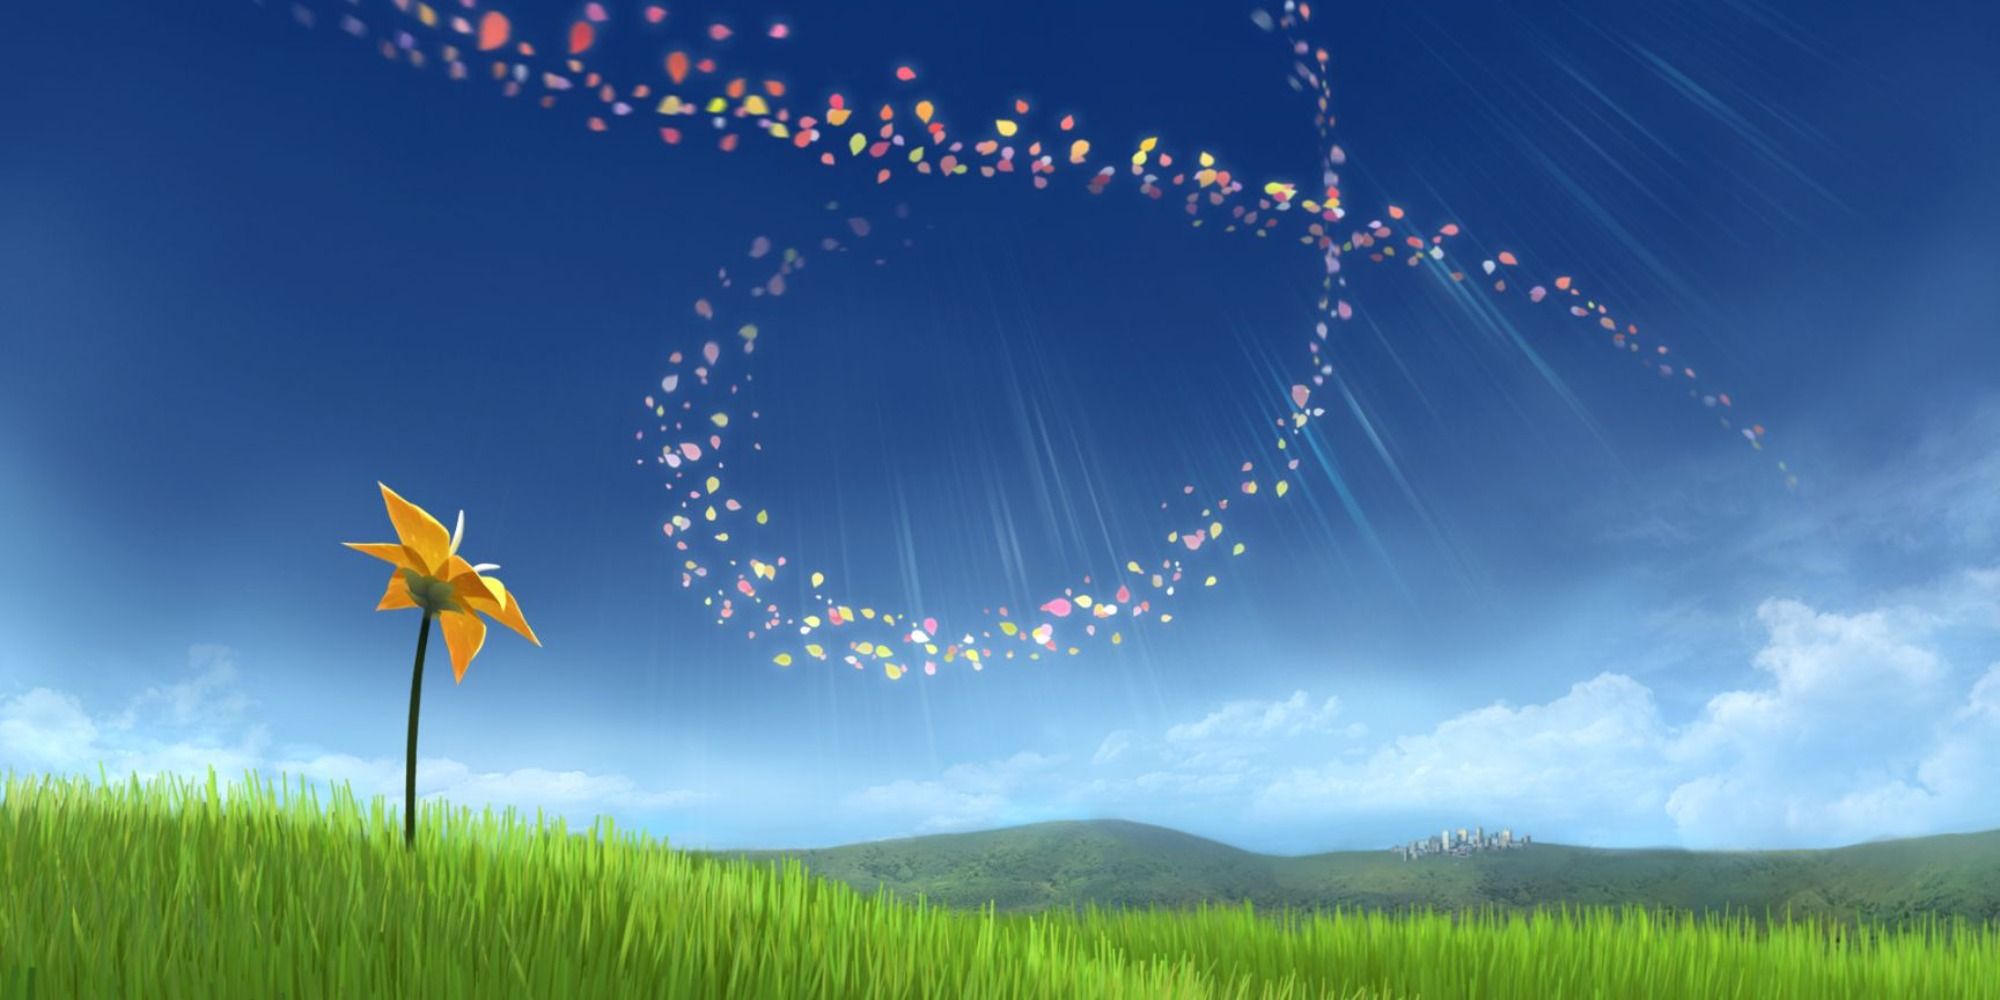 grassy area and clear blue sky with a single flower bottom left and petals swirling above